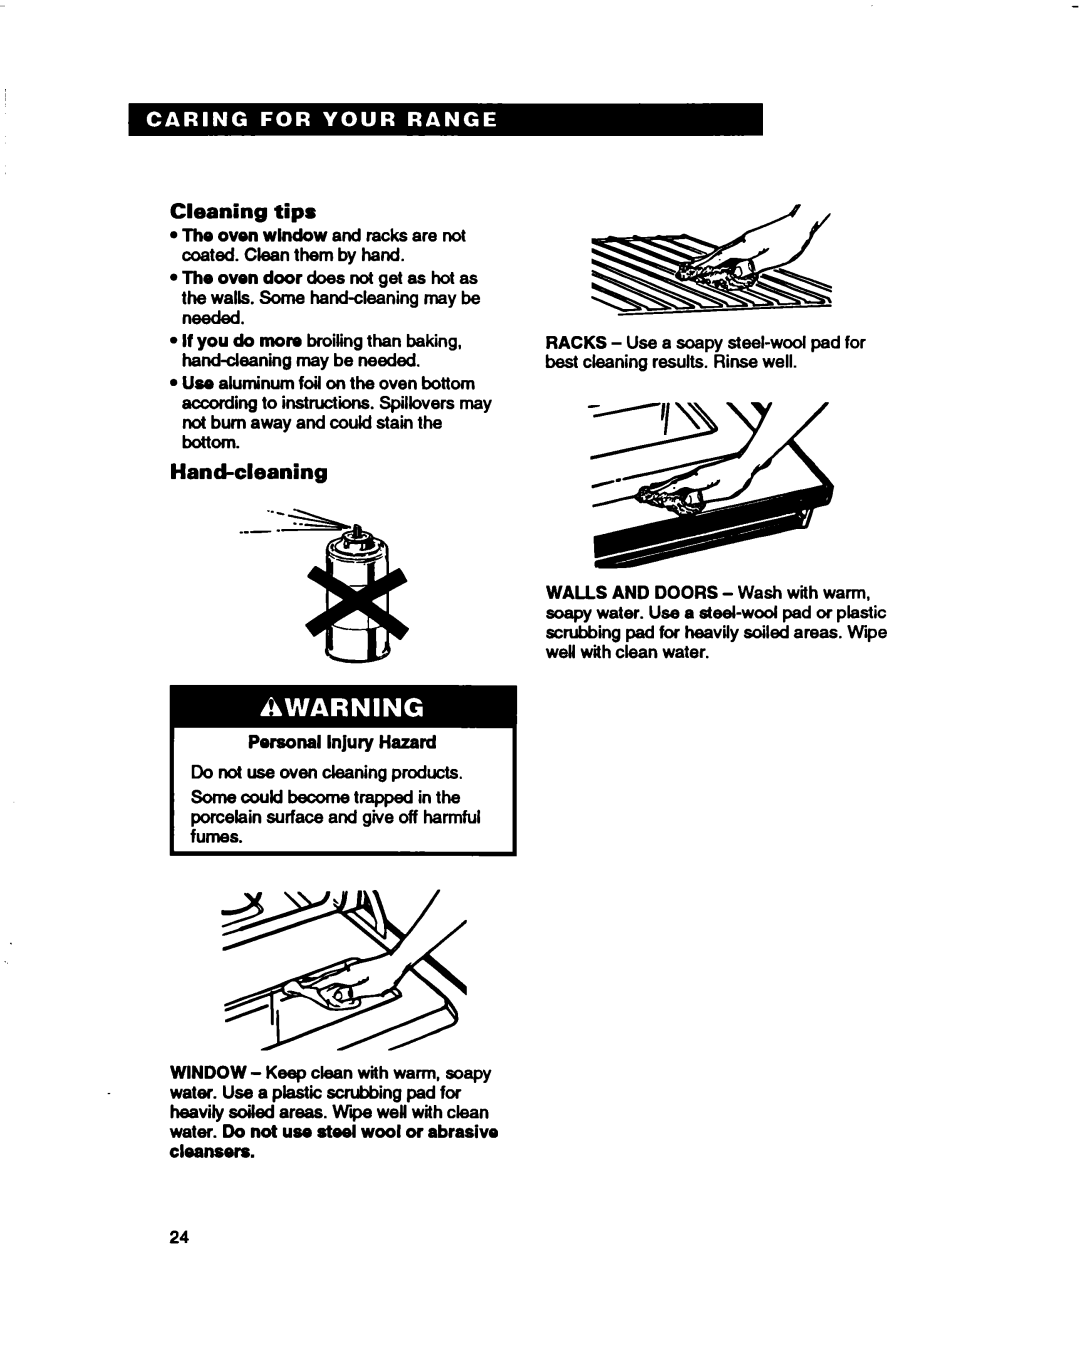 Whirlpool RF330PXD warranty Cleaning tips, Hand-cleaning, Personal Injury Hazard 